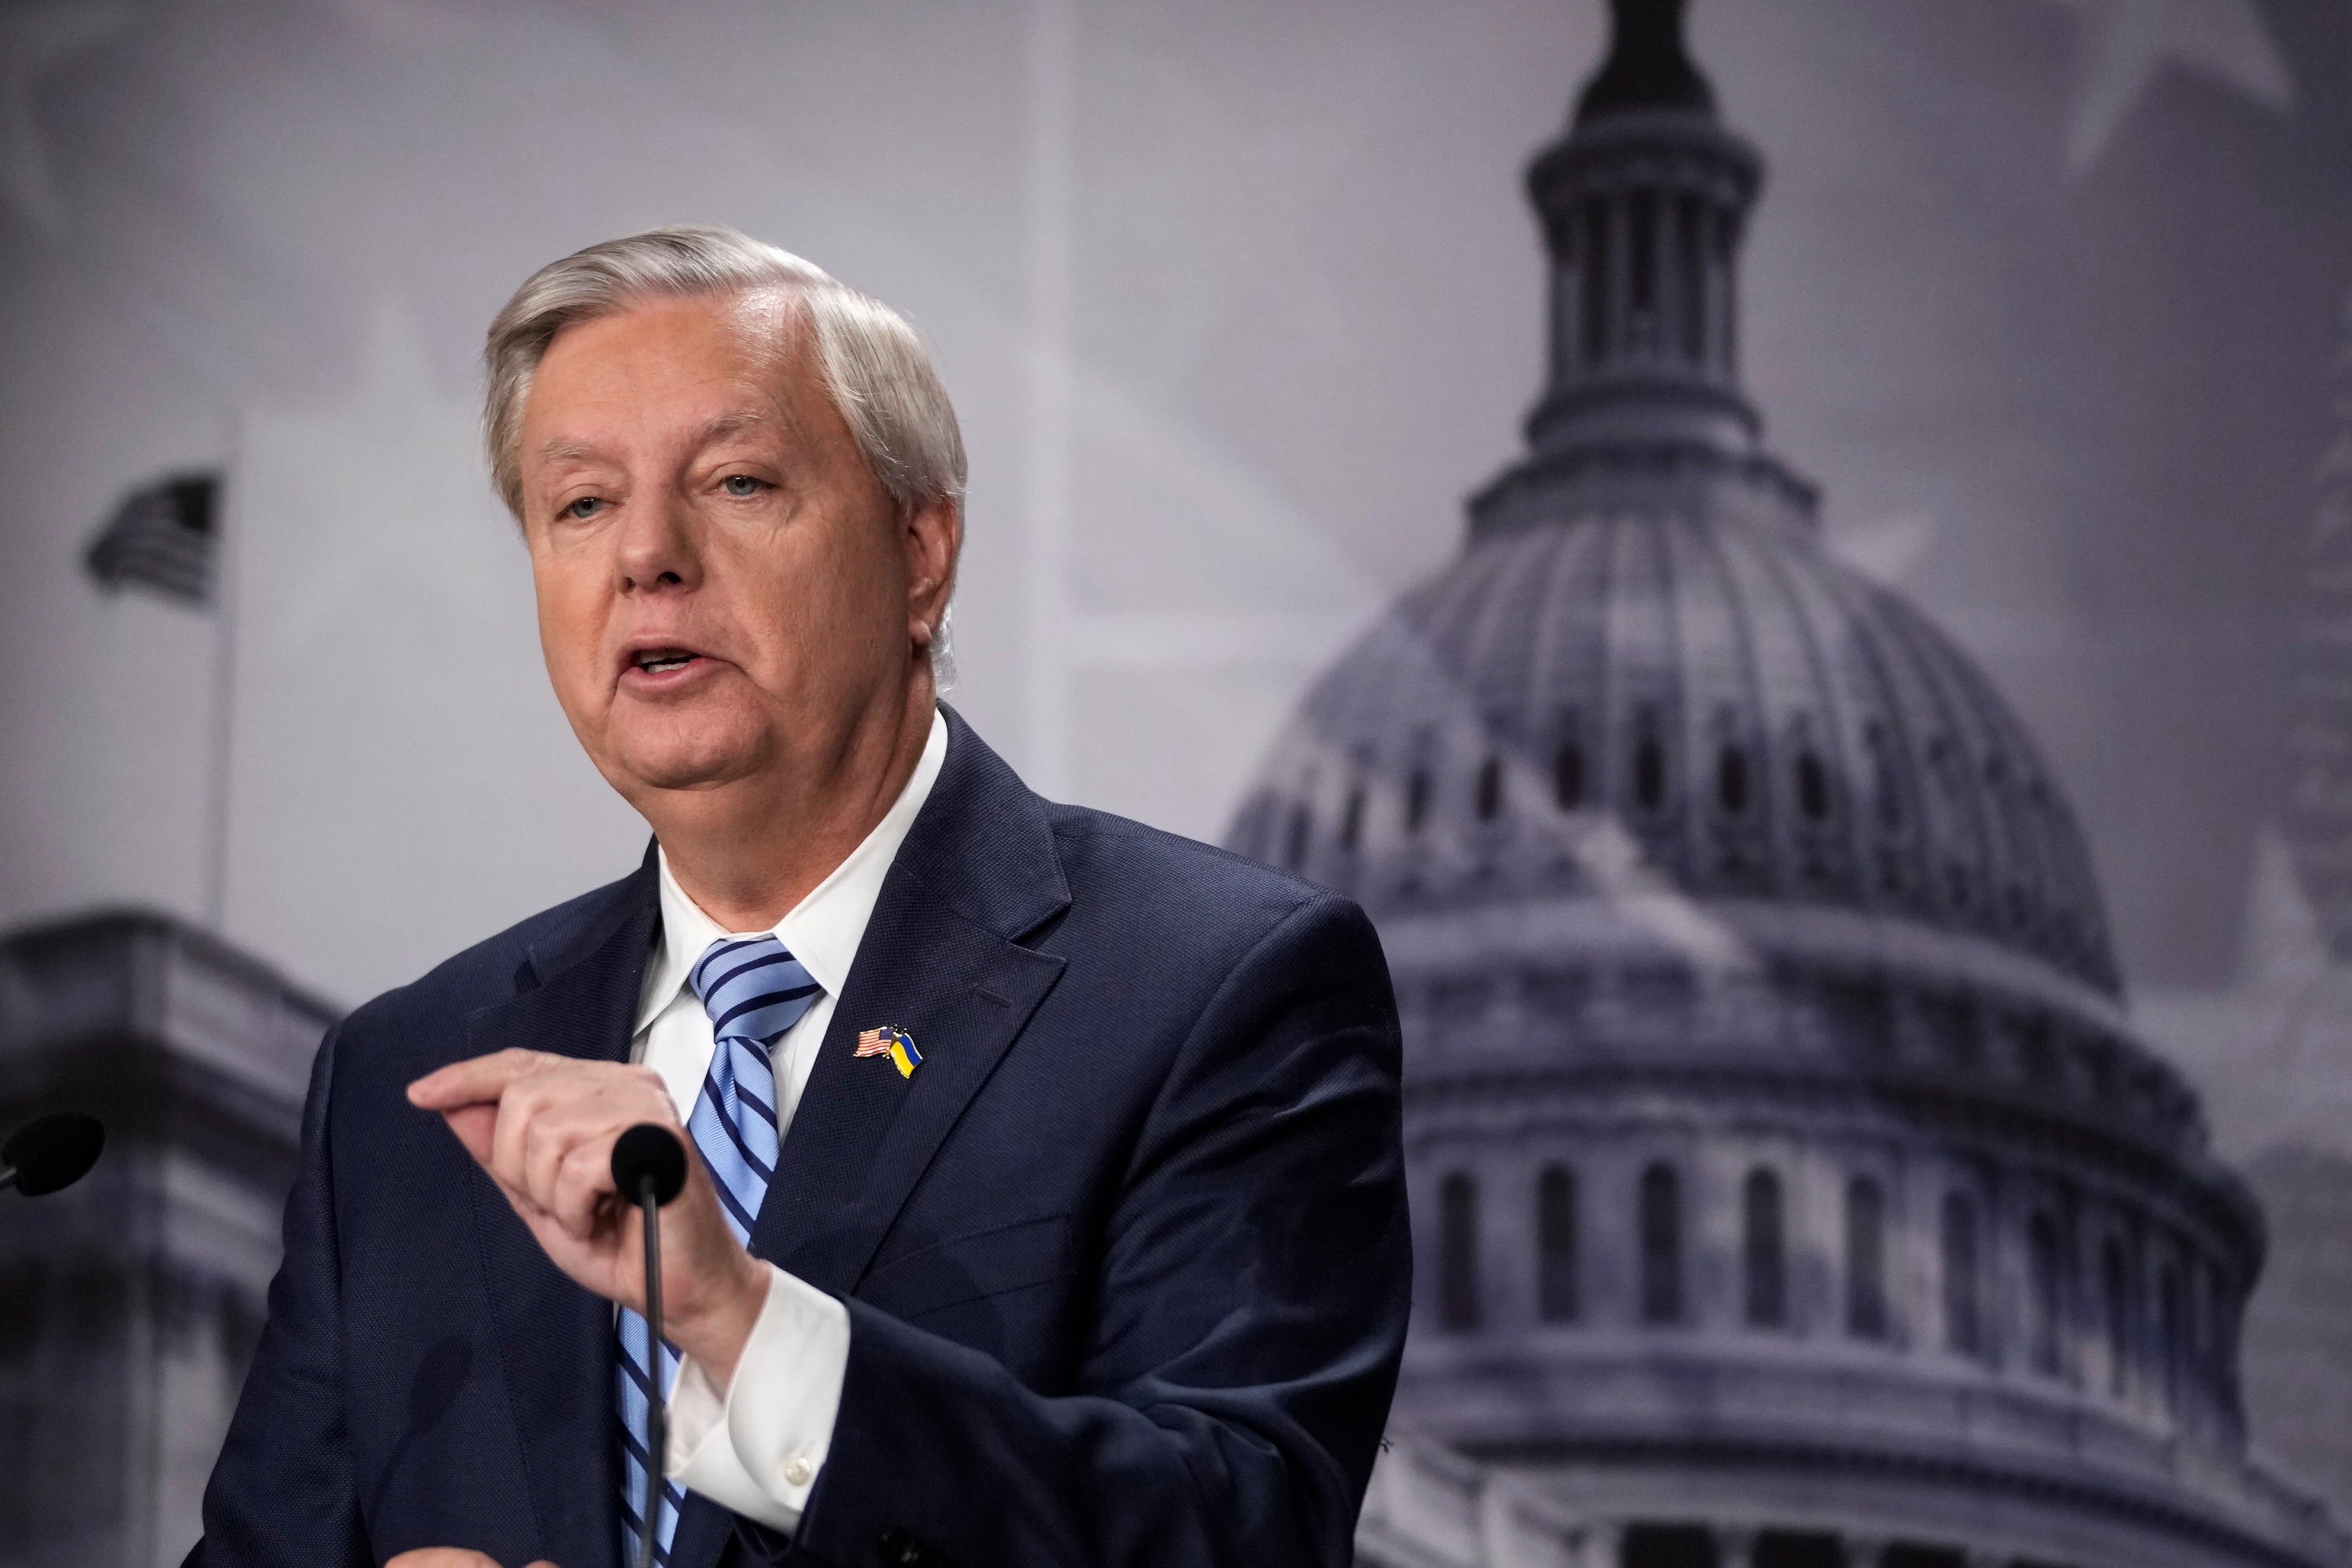 WASHINGTON, DC - MARCH 16: Sen. Lindsey Graham (R-SC) speaks about the Russian invasion in Ukraine, during a news conference at the U.S. Capitol March 16, 2022 in Washington, DC. Graham urged the Biden administration for the transfer of MiG warplanes to Ukraine via Poland. (Photo by Drew Angerer/Getty Images)